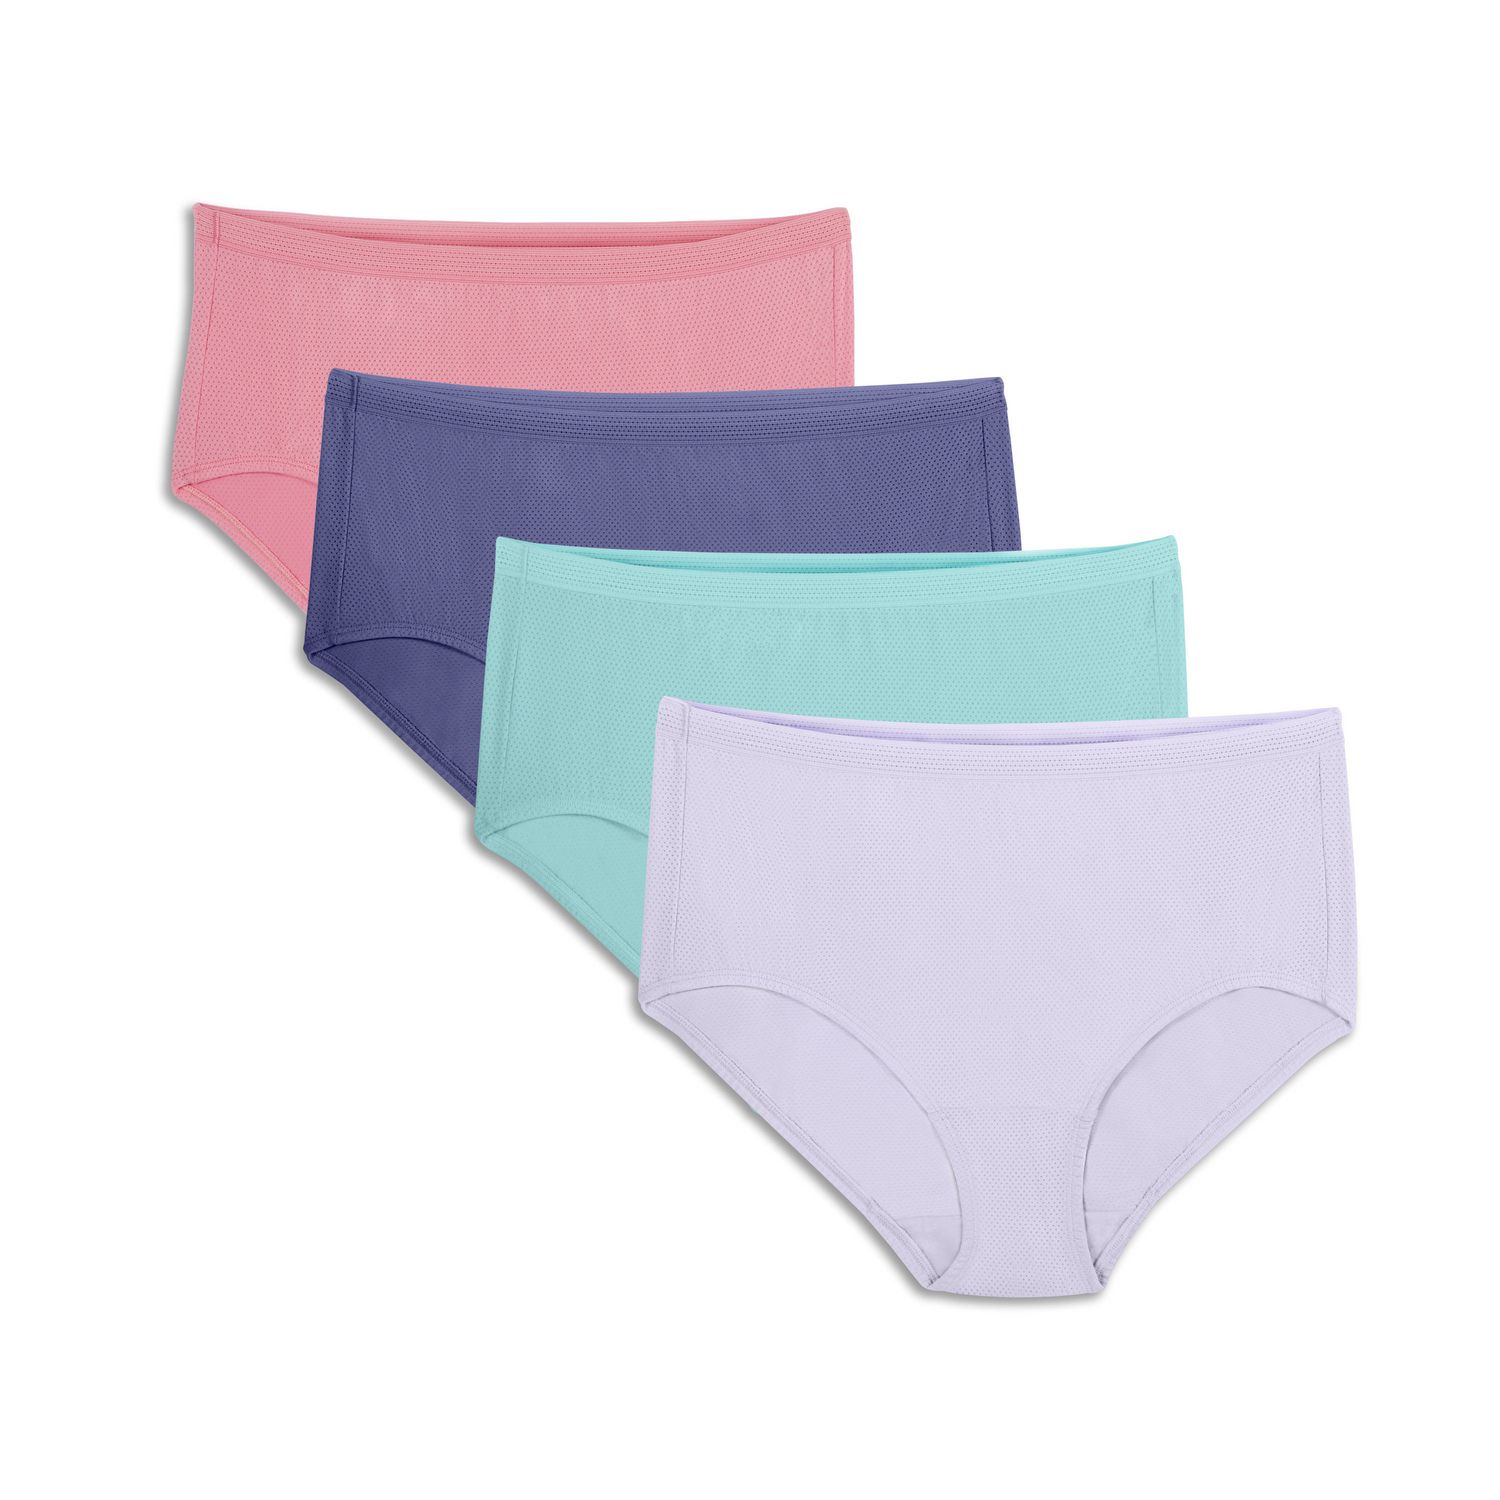 Women's Fruit of the Loom® Signature 4-pack Micro Mesh Briefs 4DKBMBR